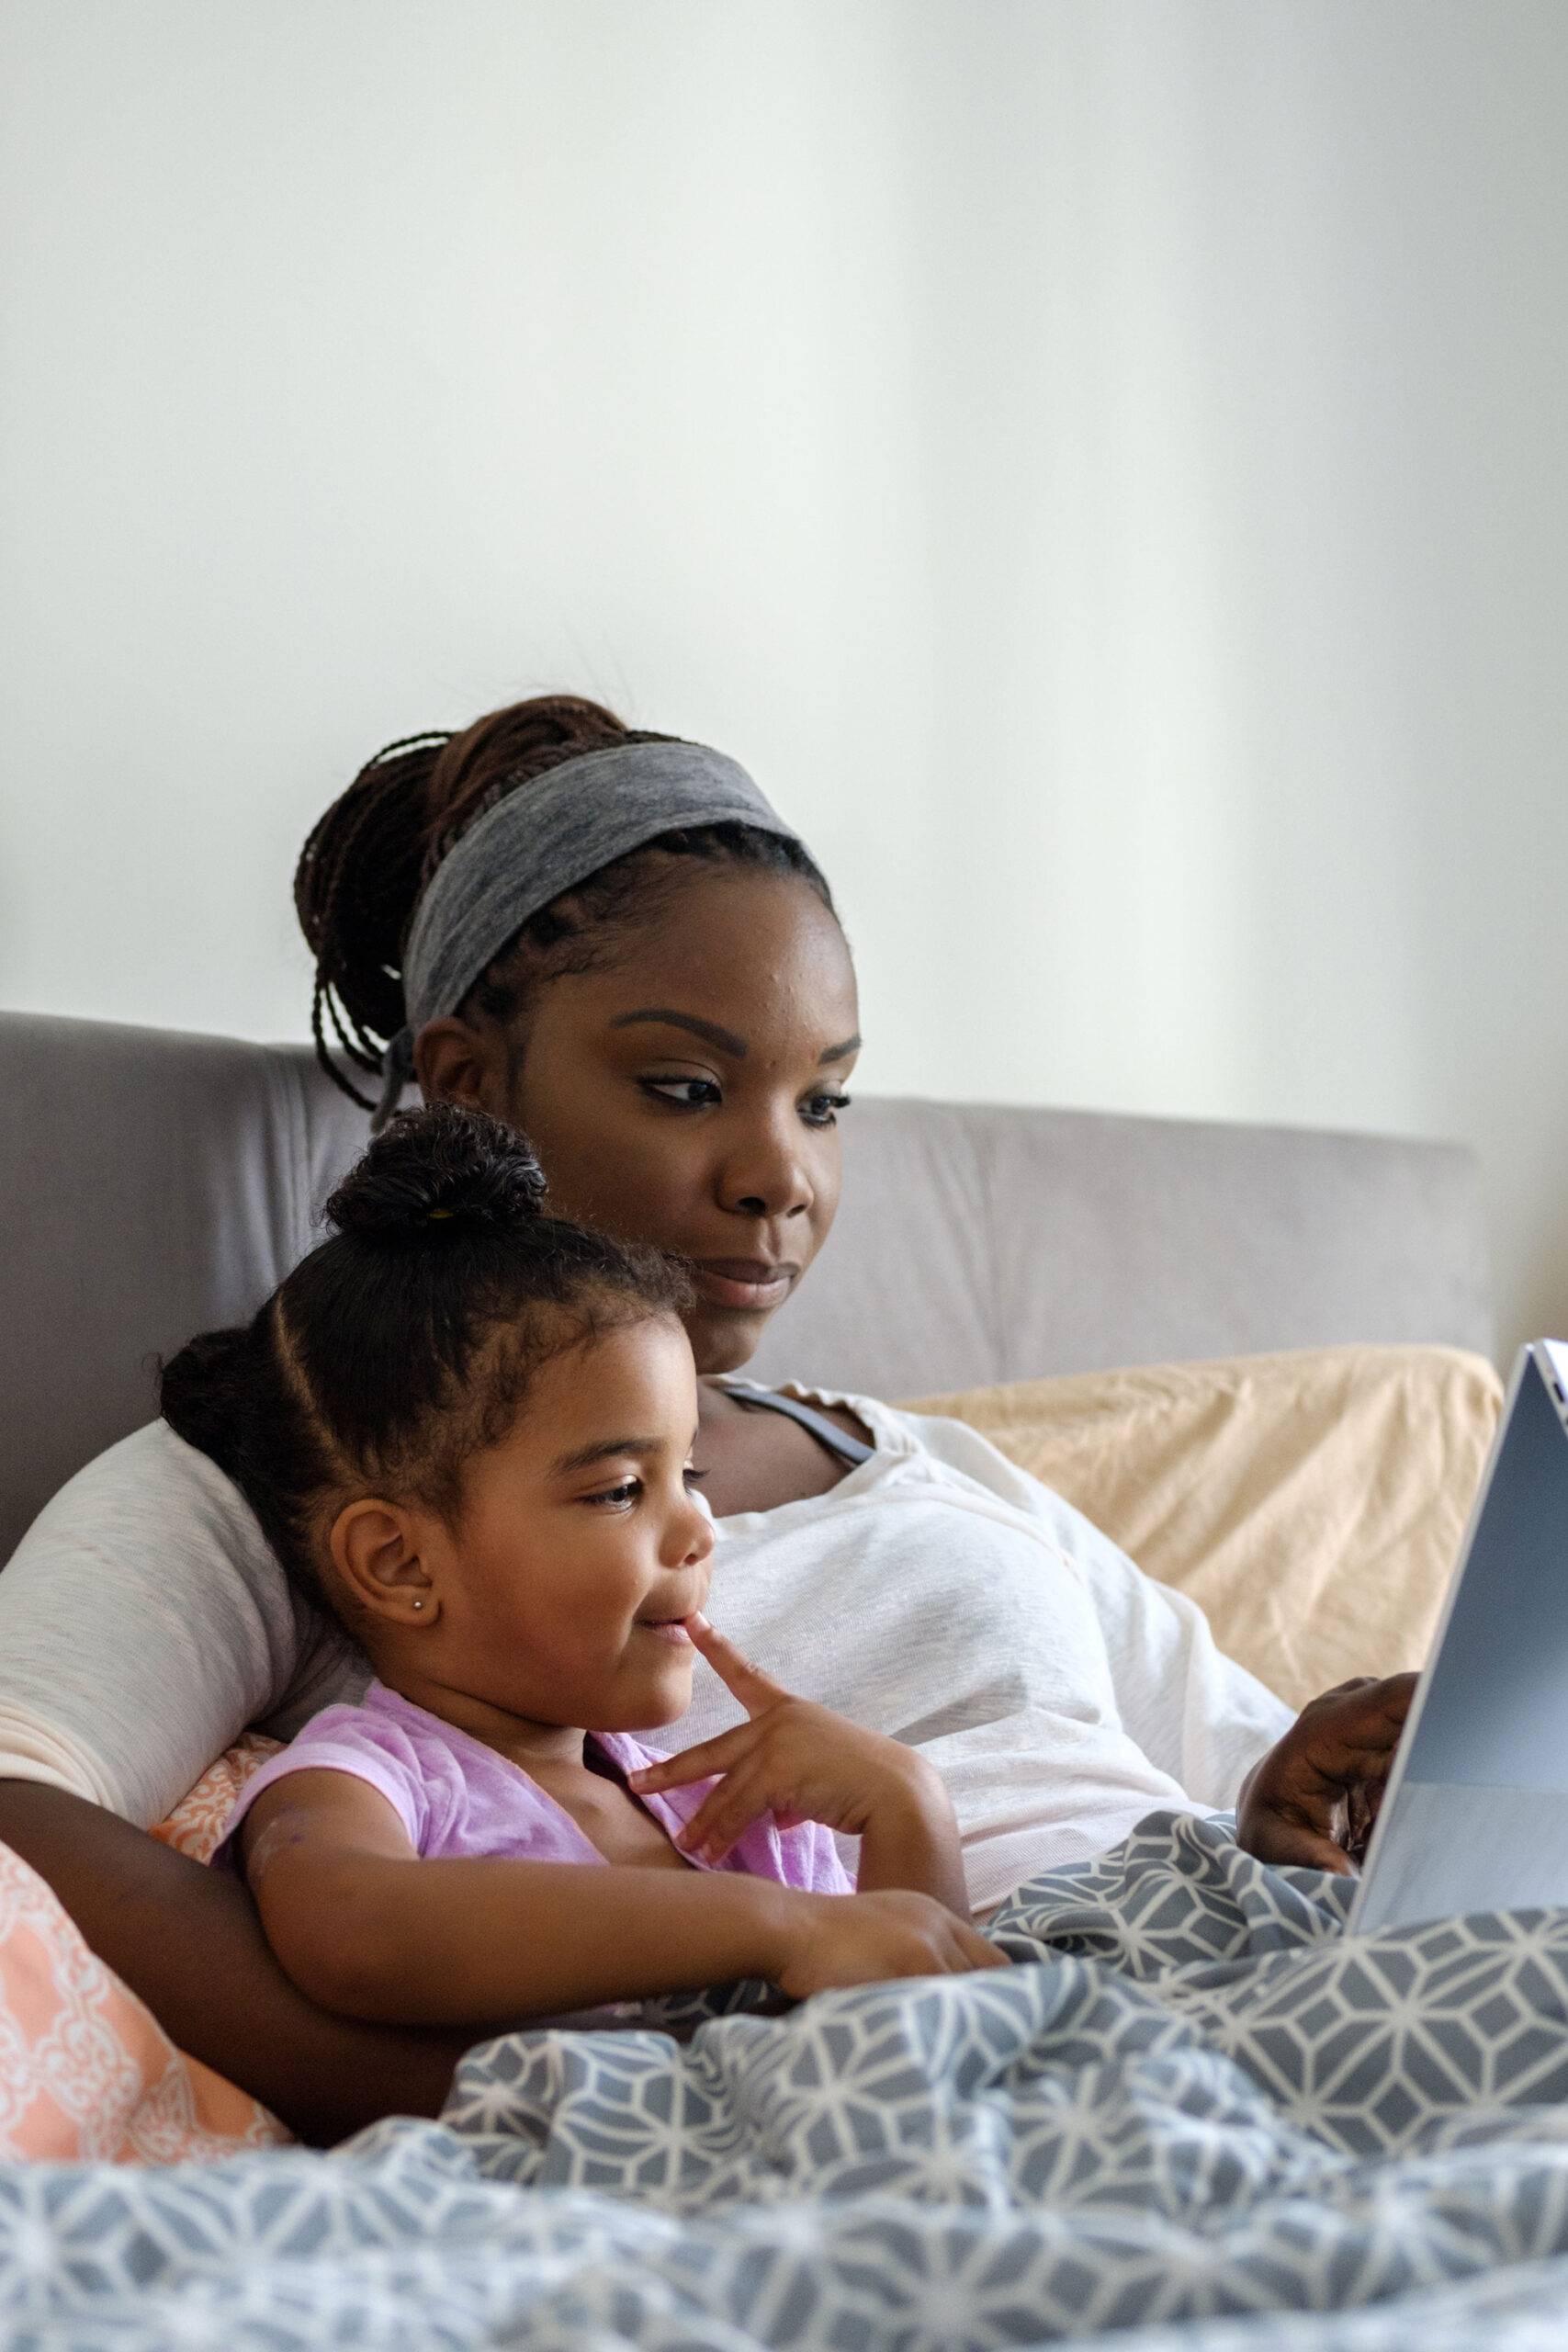 African American mother with her mixed race daughter laying on the parents bed watching educational shows on their 3 in one computer device. This computer is an all in one device that can be used as a laptop, tablet or entertainment device. The lighting in this scene is coming from the window.